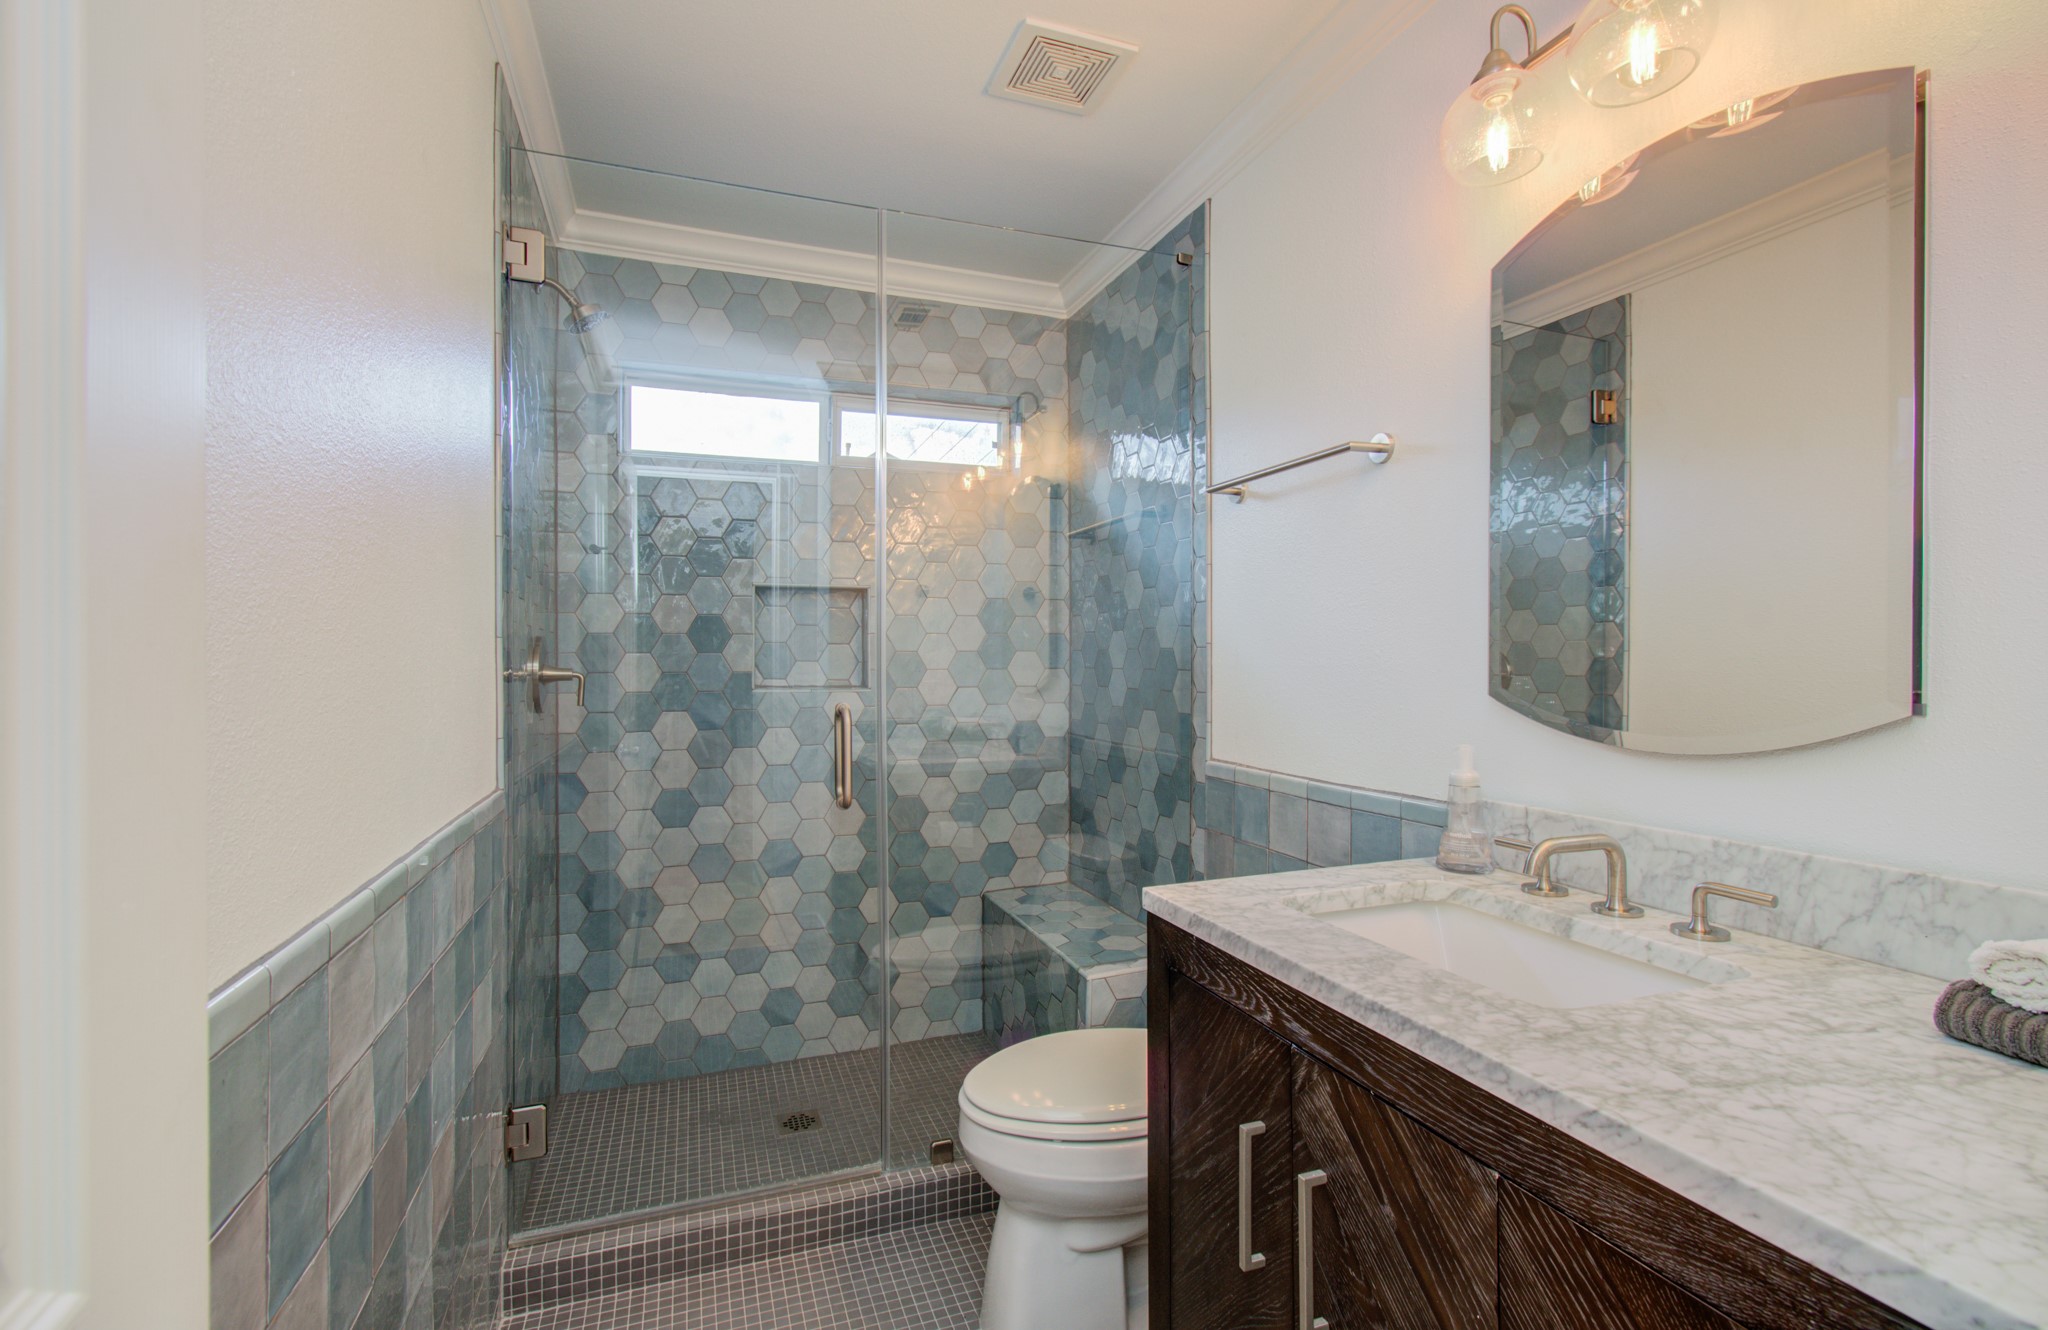 The secondary bathroom, also remodeled in 2021, is adorned with WOW Zellige tile, reflecting a contemporary and stylish update.